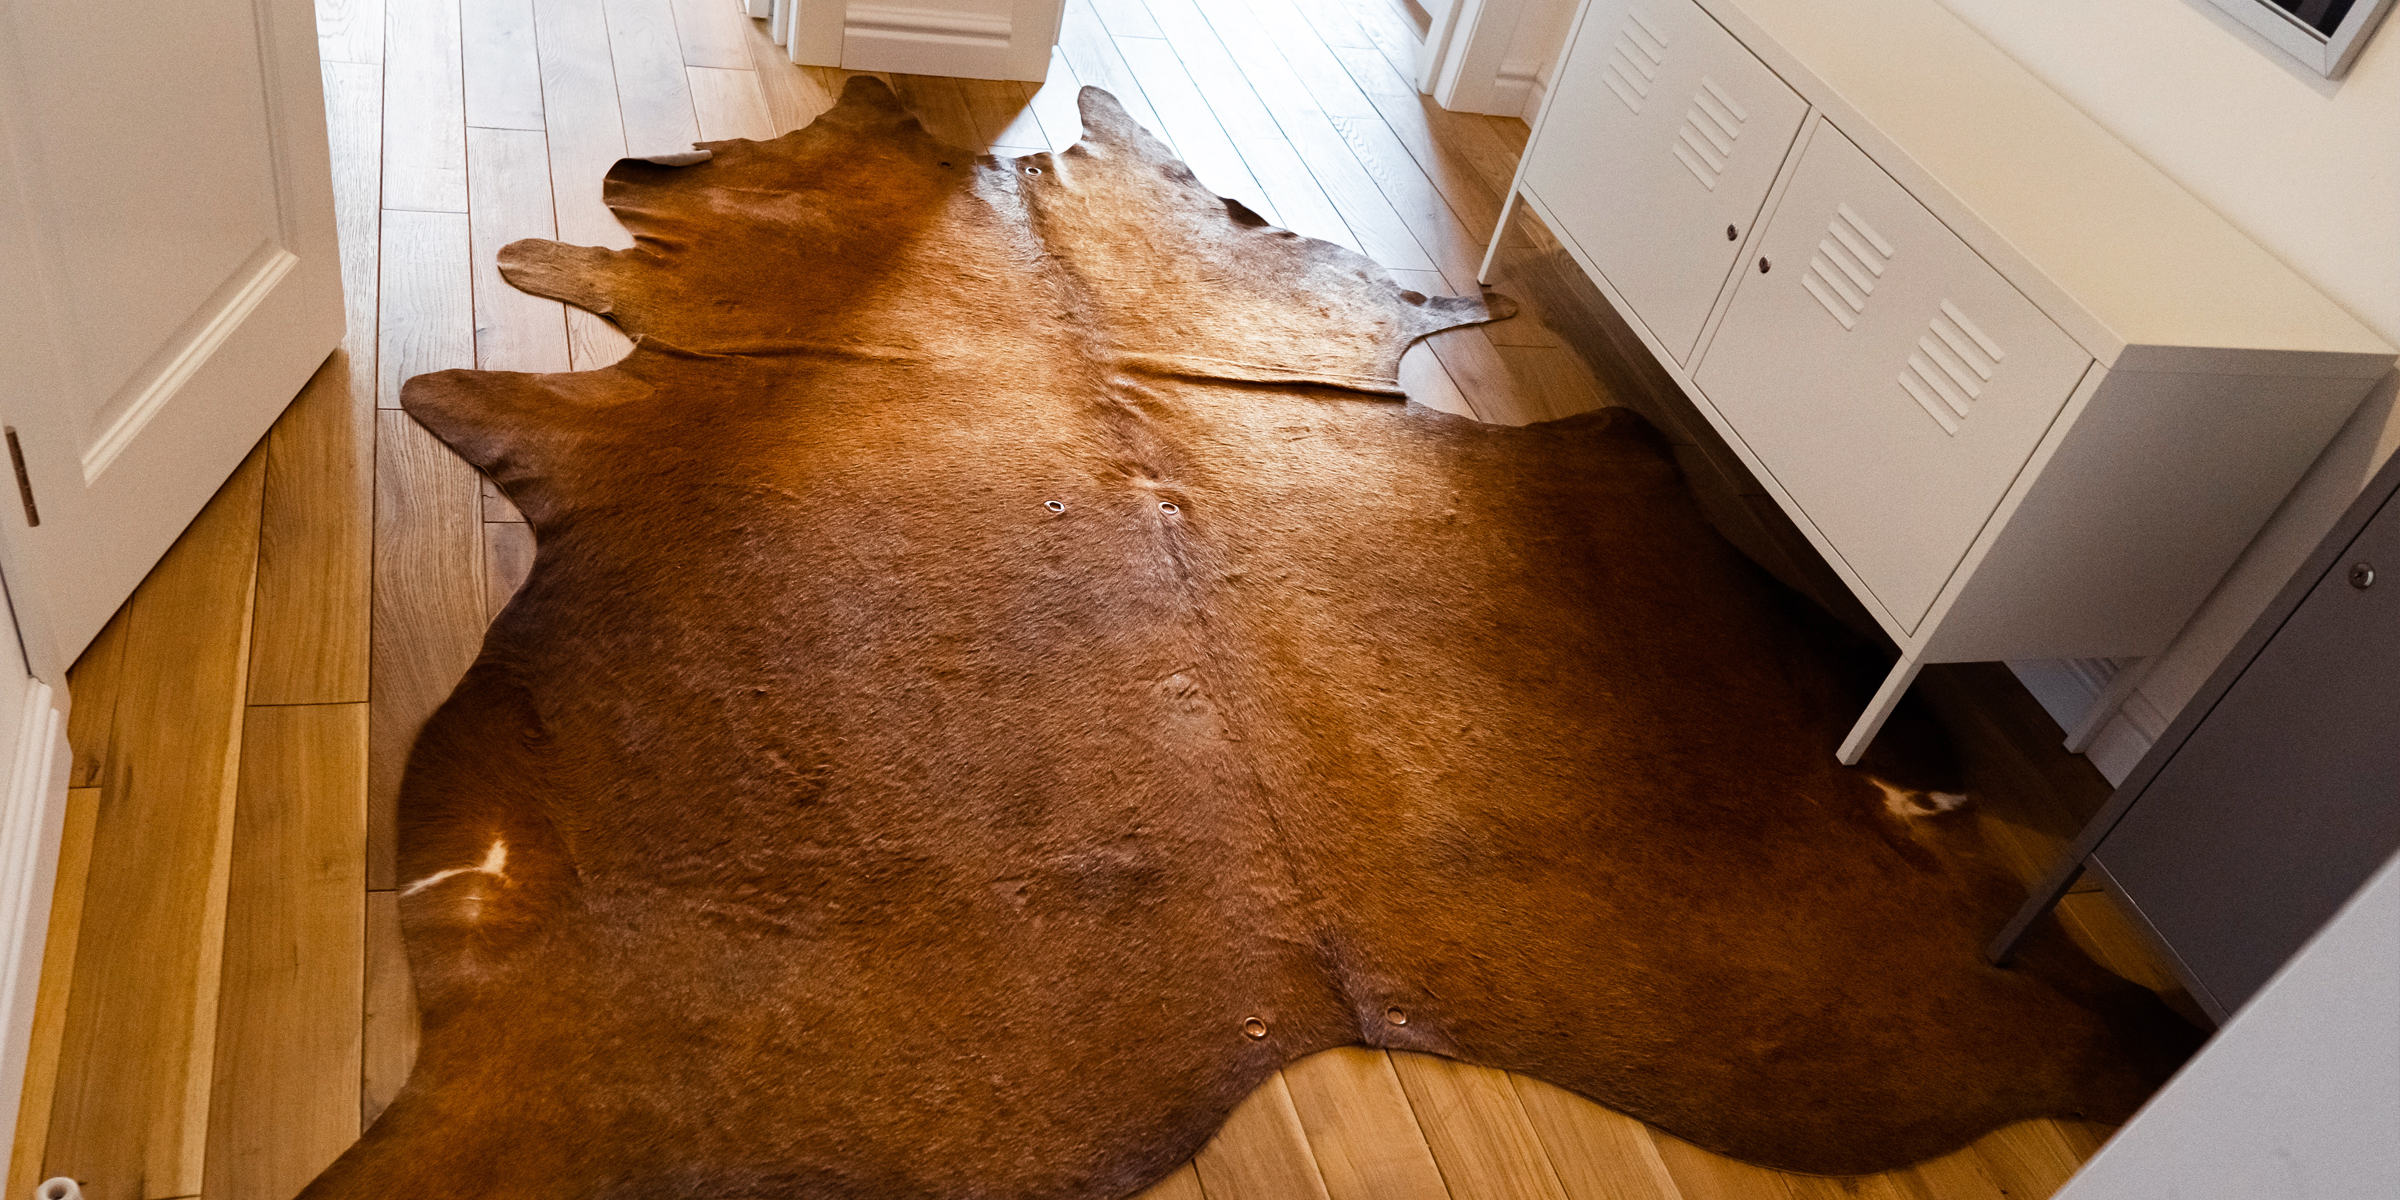 A cowhide rug | Source: Shutterstock